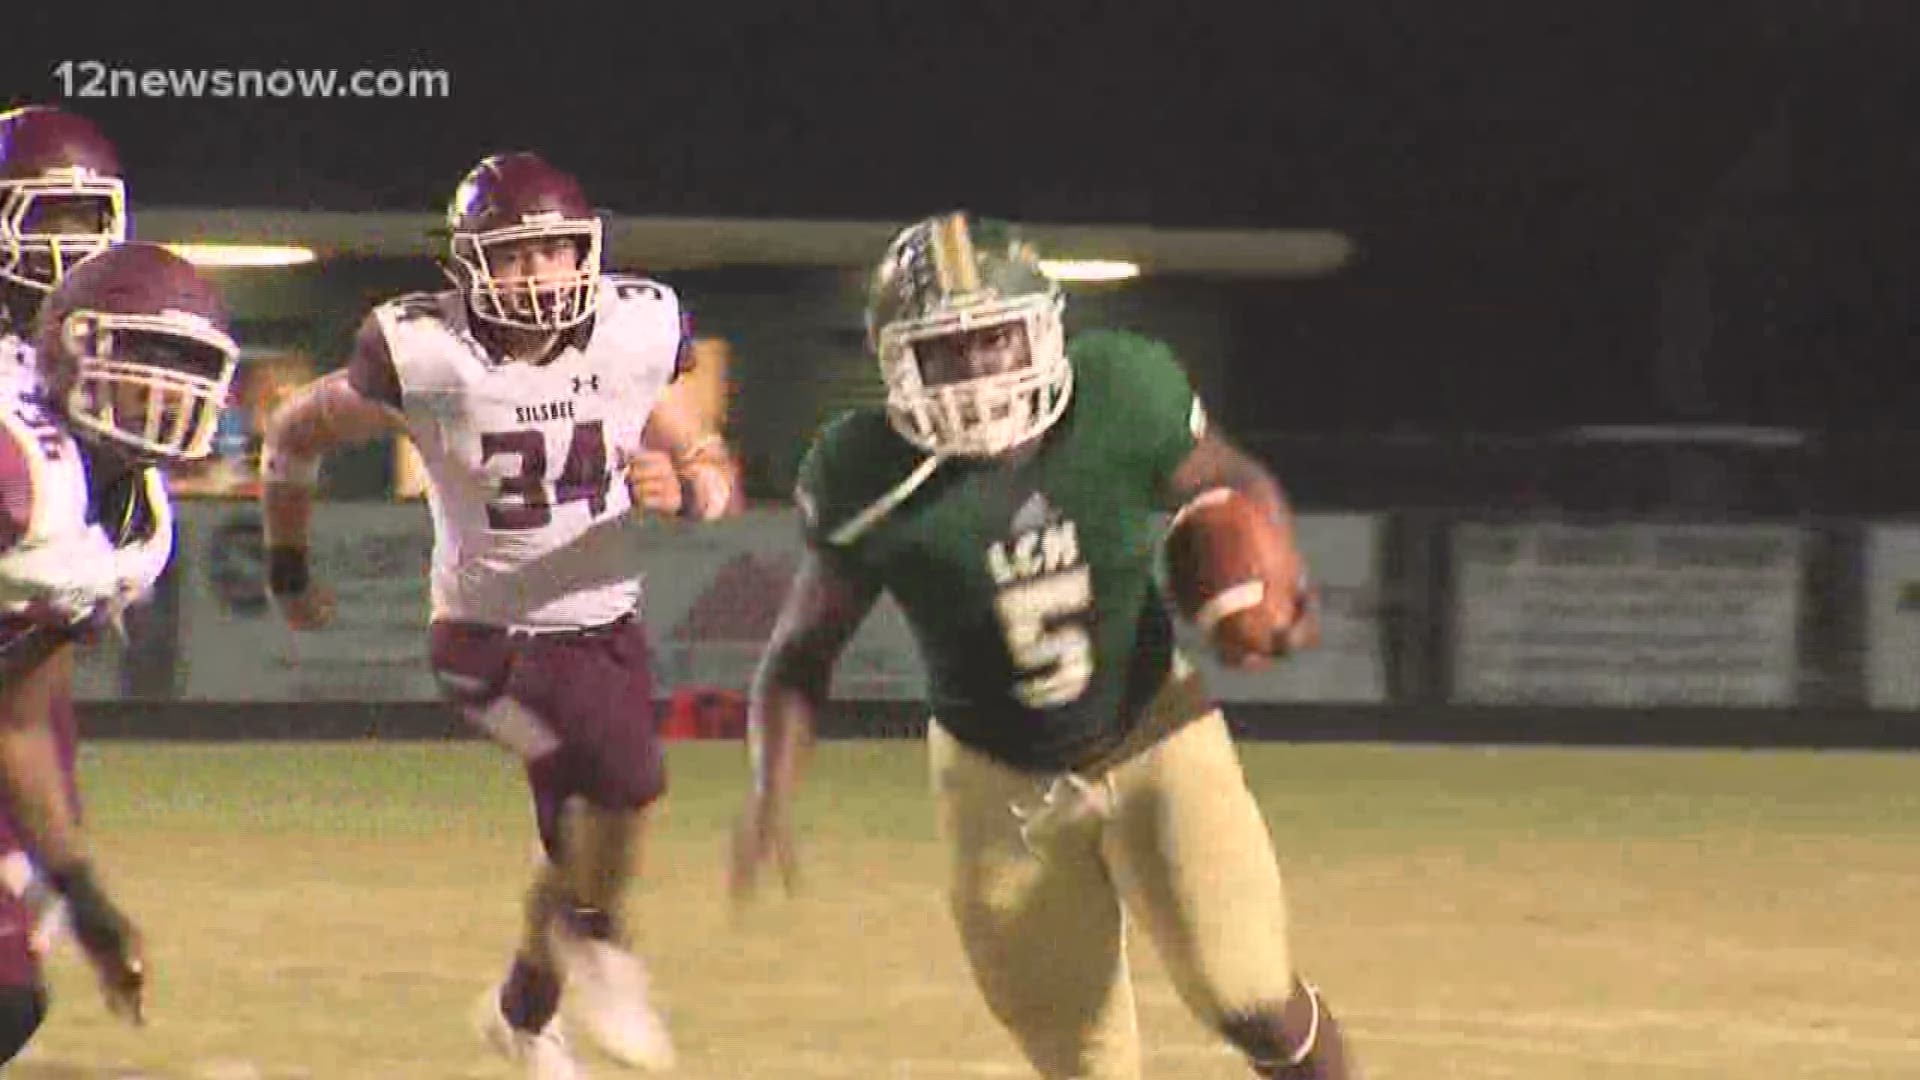 Winters ran for 226 yards and 3 TD's in district opening win over Silsbee